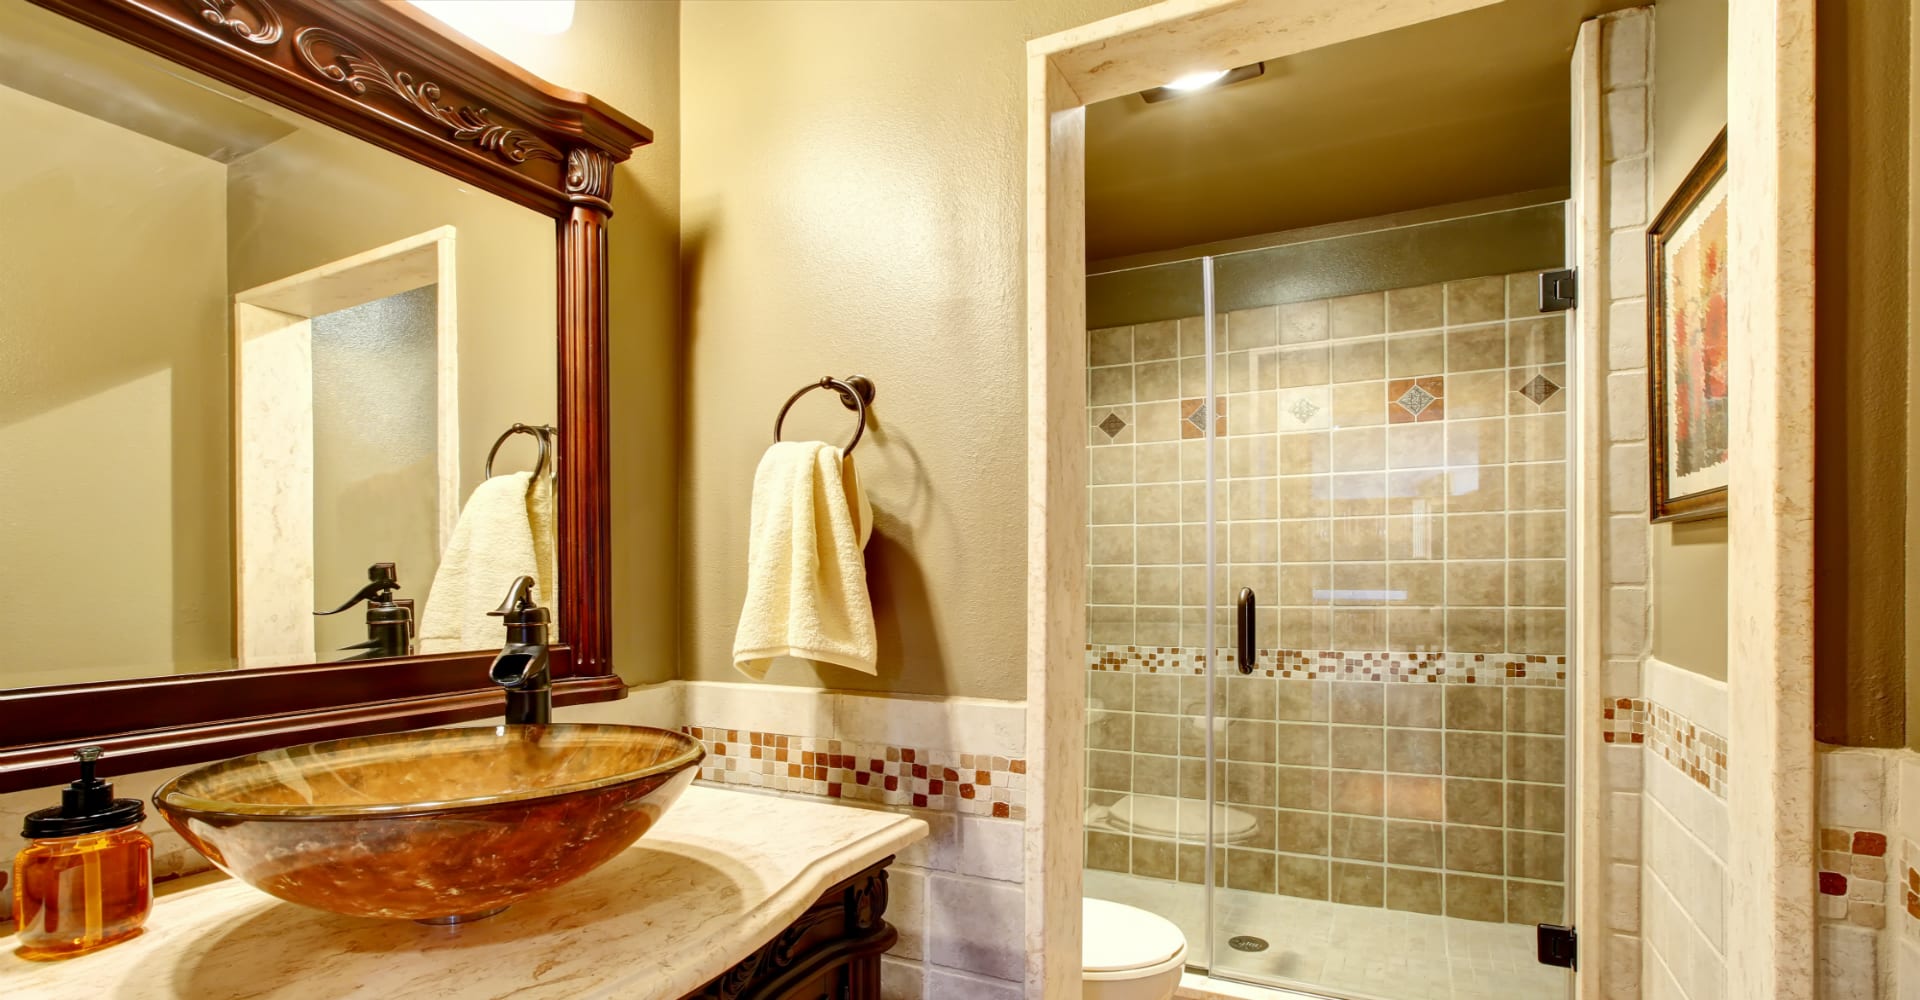 Bathroom Remodeling Tips Storage Solution Ideas for Your New Bathroom